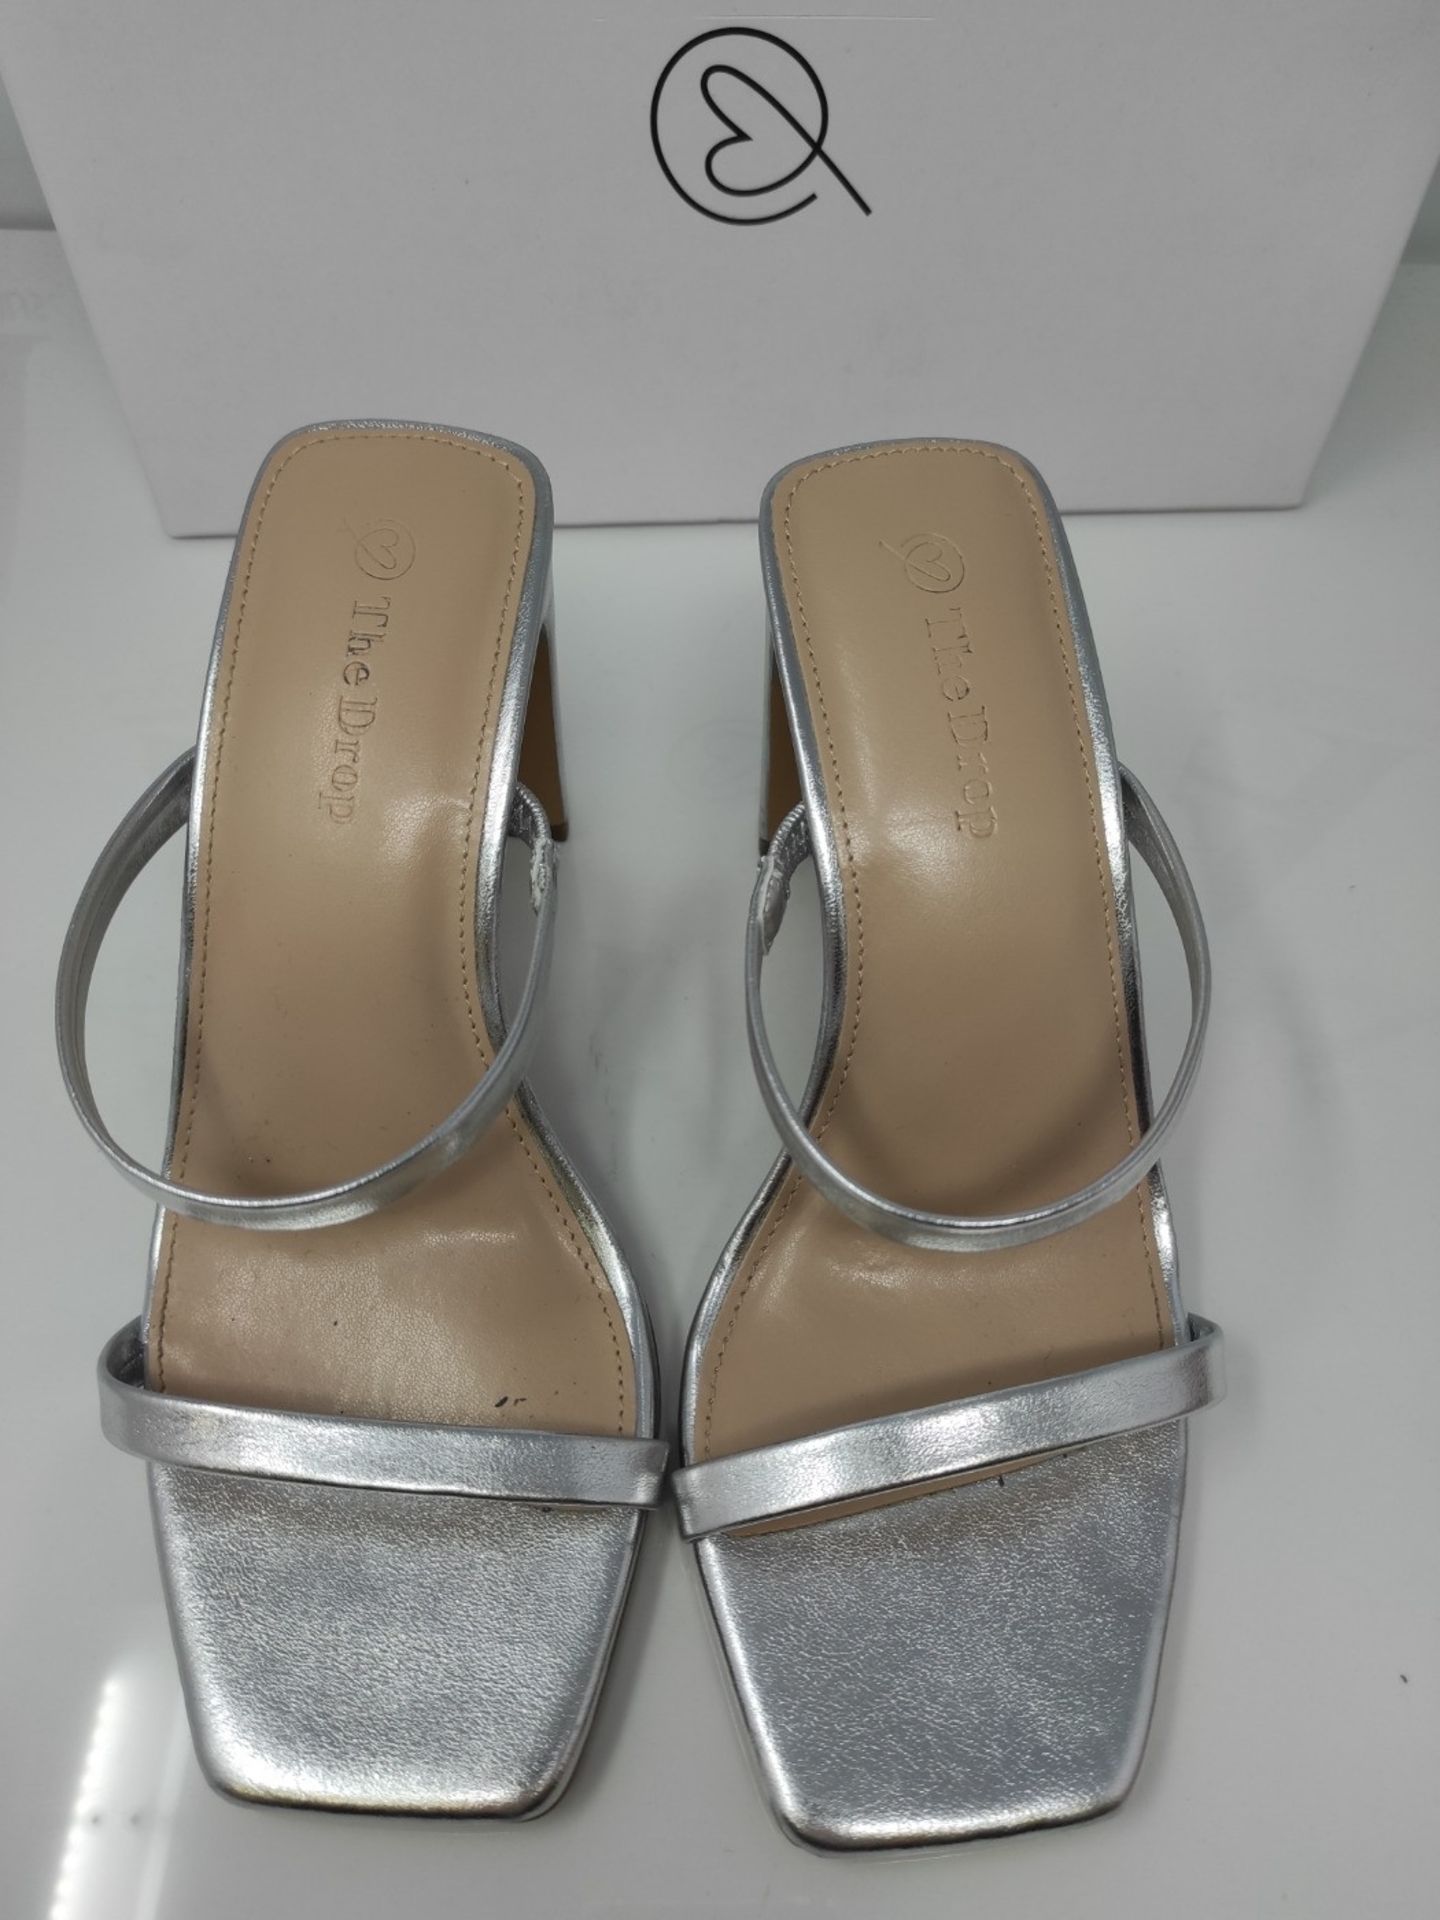 The Drop Women's Avery Square Toe Two Strap High Heeled Sandals - Silver - Size 36 EU - Image 3 of 3